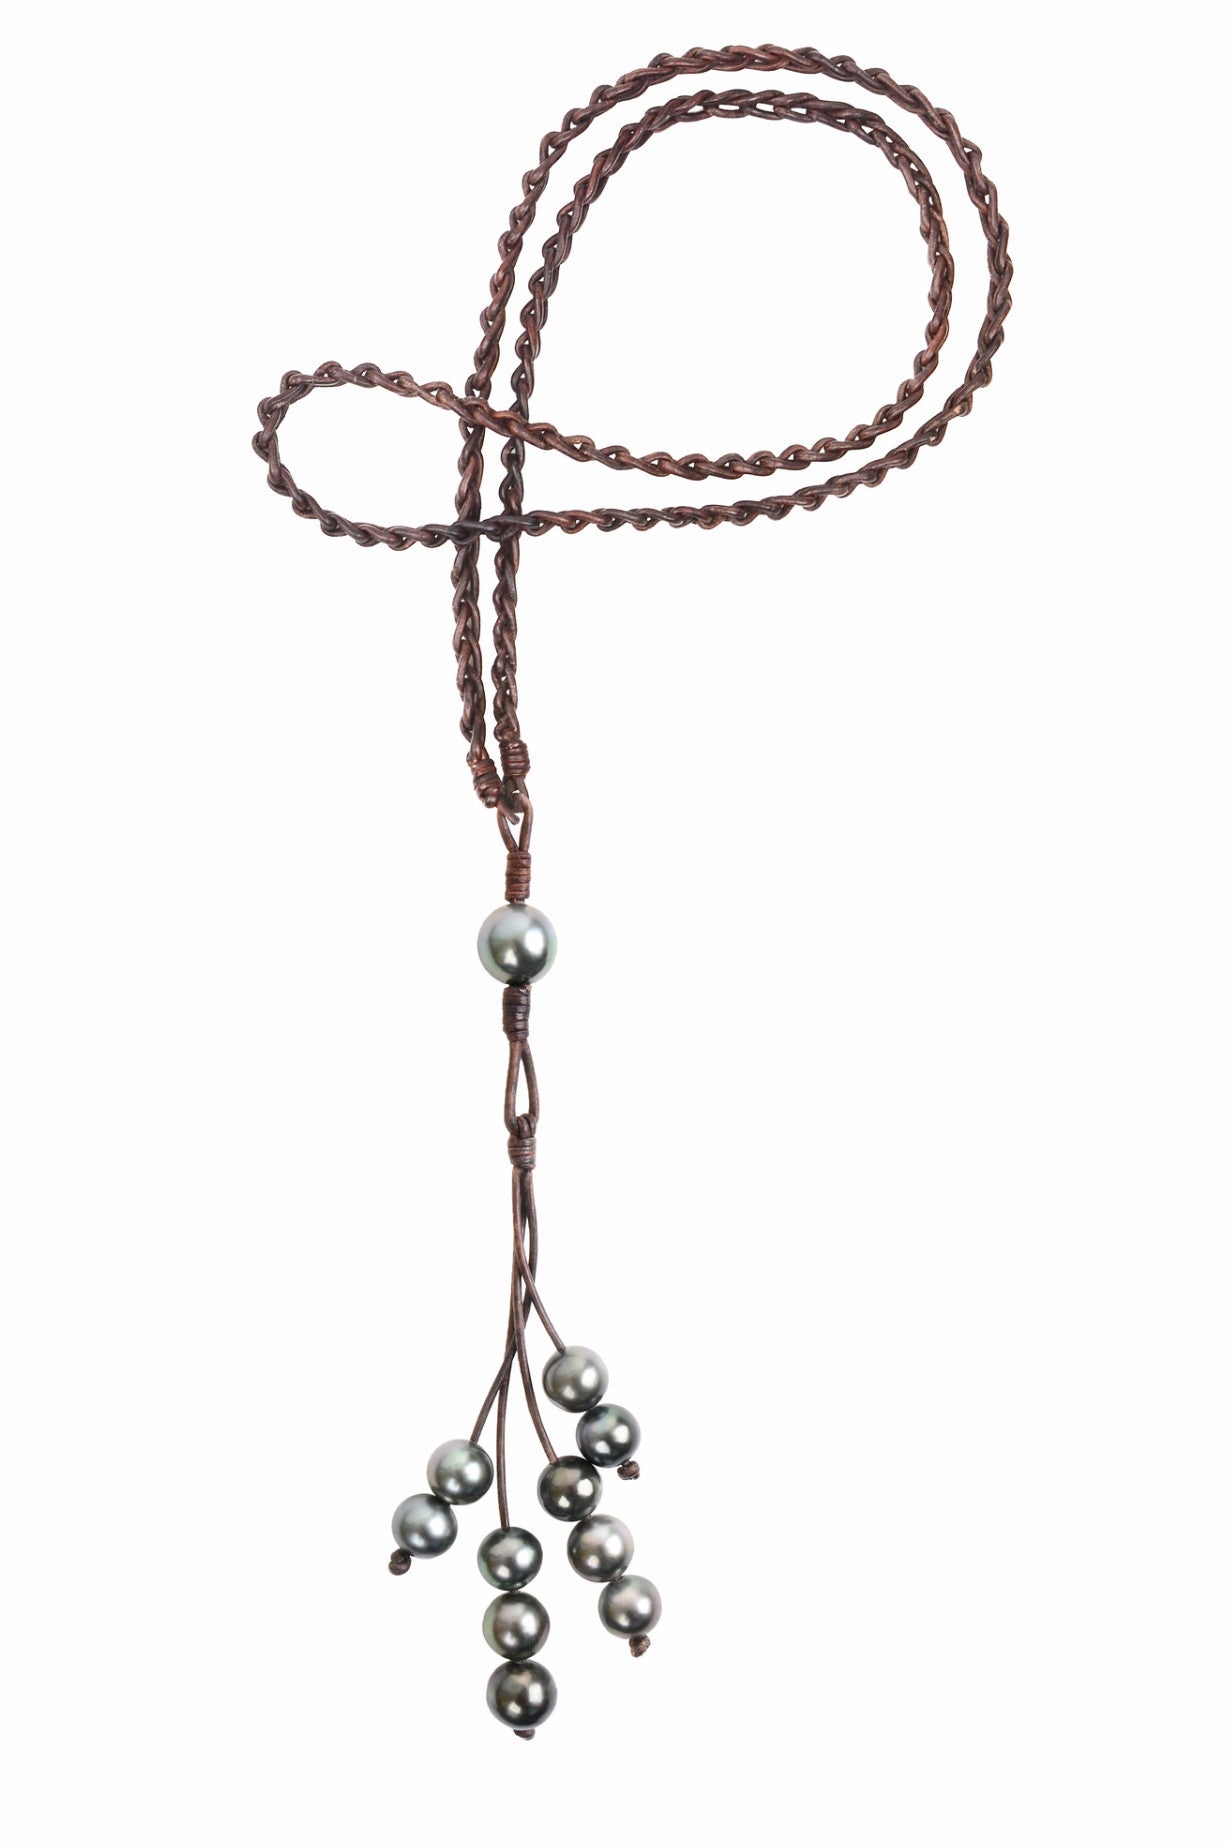 Eternity Necklace, Tahitian - Hottest Designer Pearl and Leather Jewelry | VINCENT PEACH
